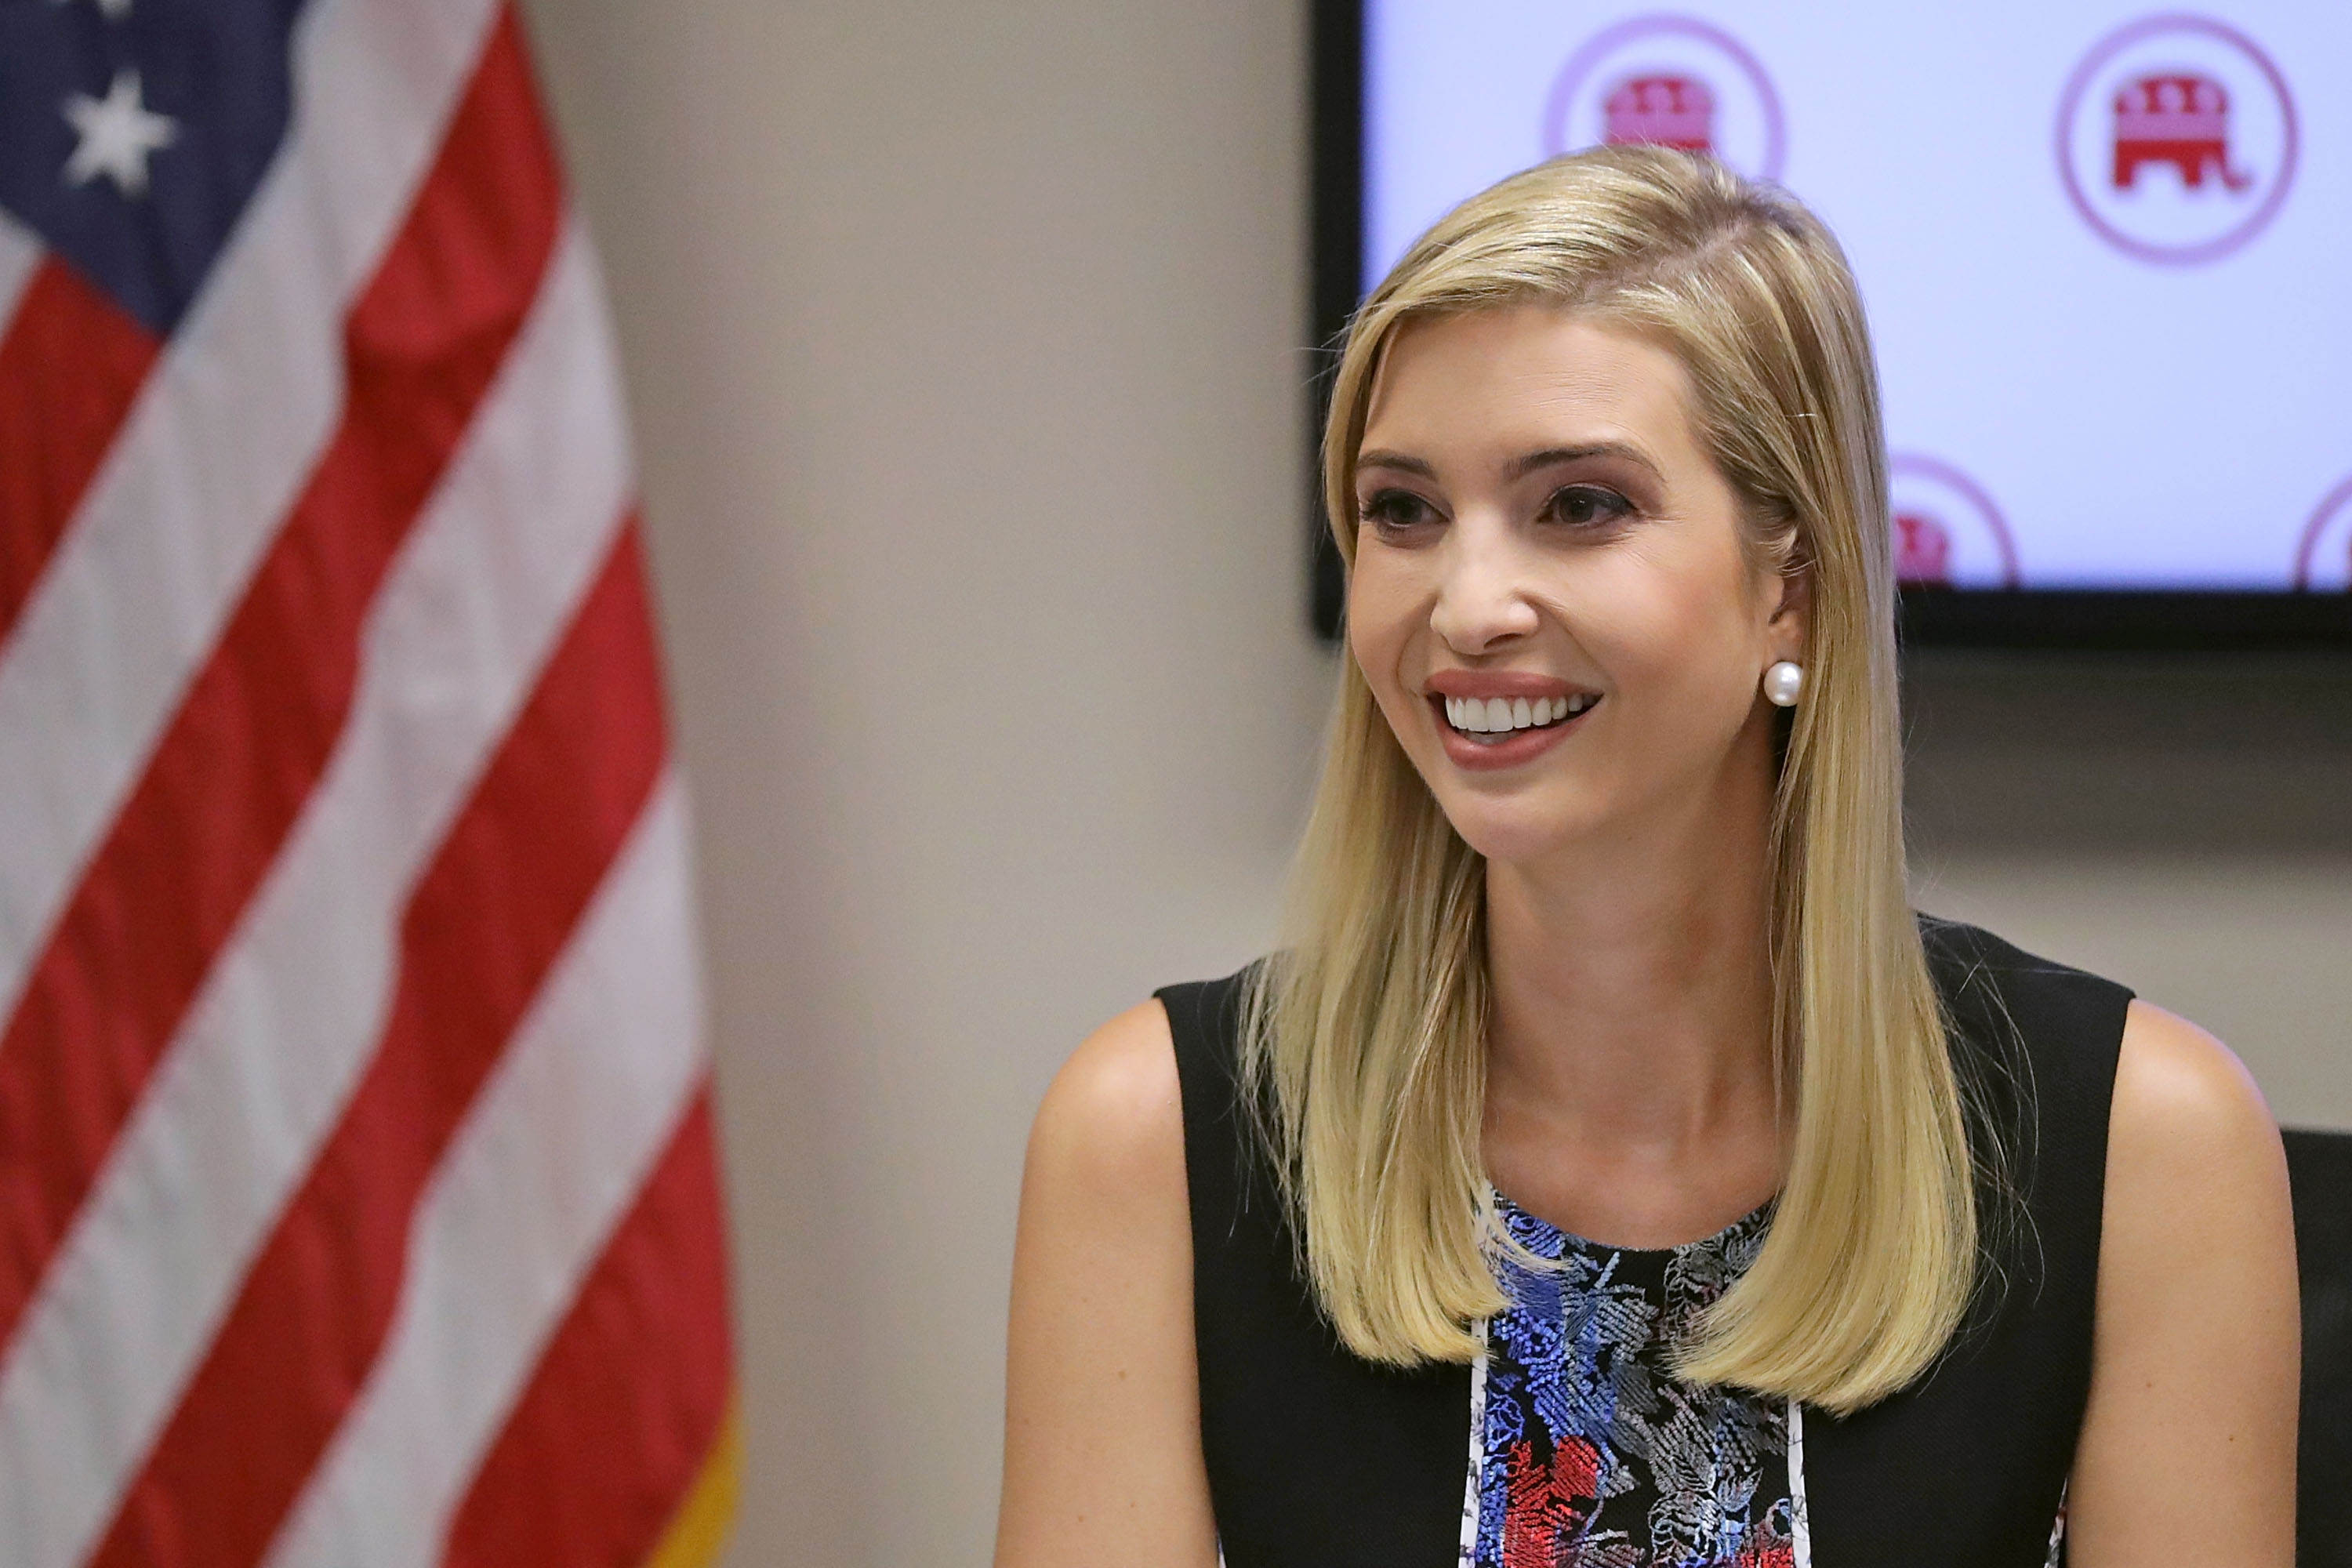 Ivanka Trump, daughter of Republican presidential nominee Donald Trump, visits with women GOP members of Congress at the Republican National Committee headquarters on Capitol Hill on Sept. 20, 2016 in Washington, DC. (Chip Somodevilla/Getty Images)